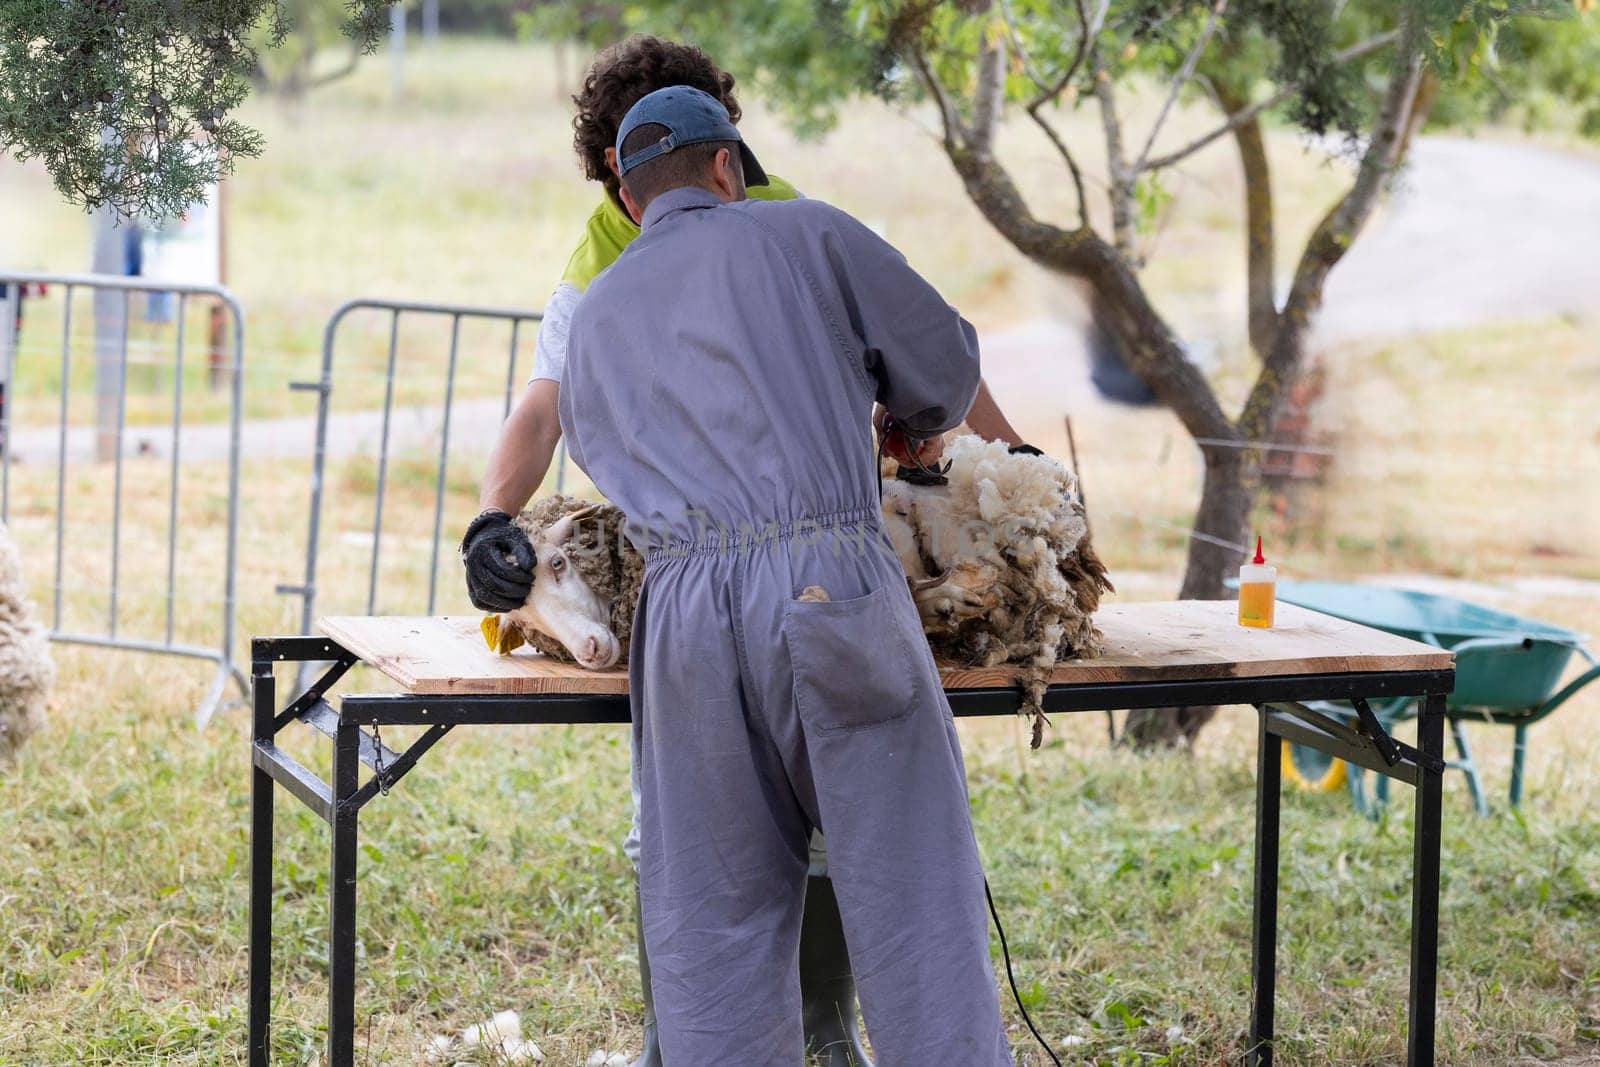 A man in a grey jumpsuit is cutting the wool off of a sheep. The sheep is laying on a table